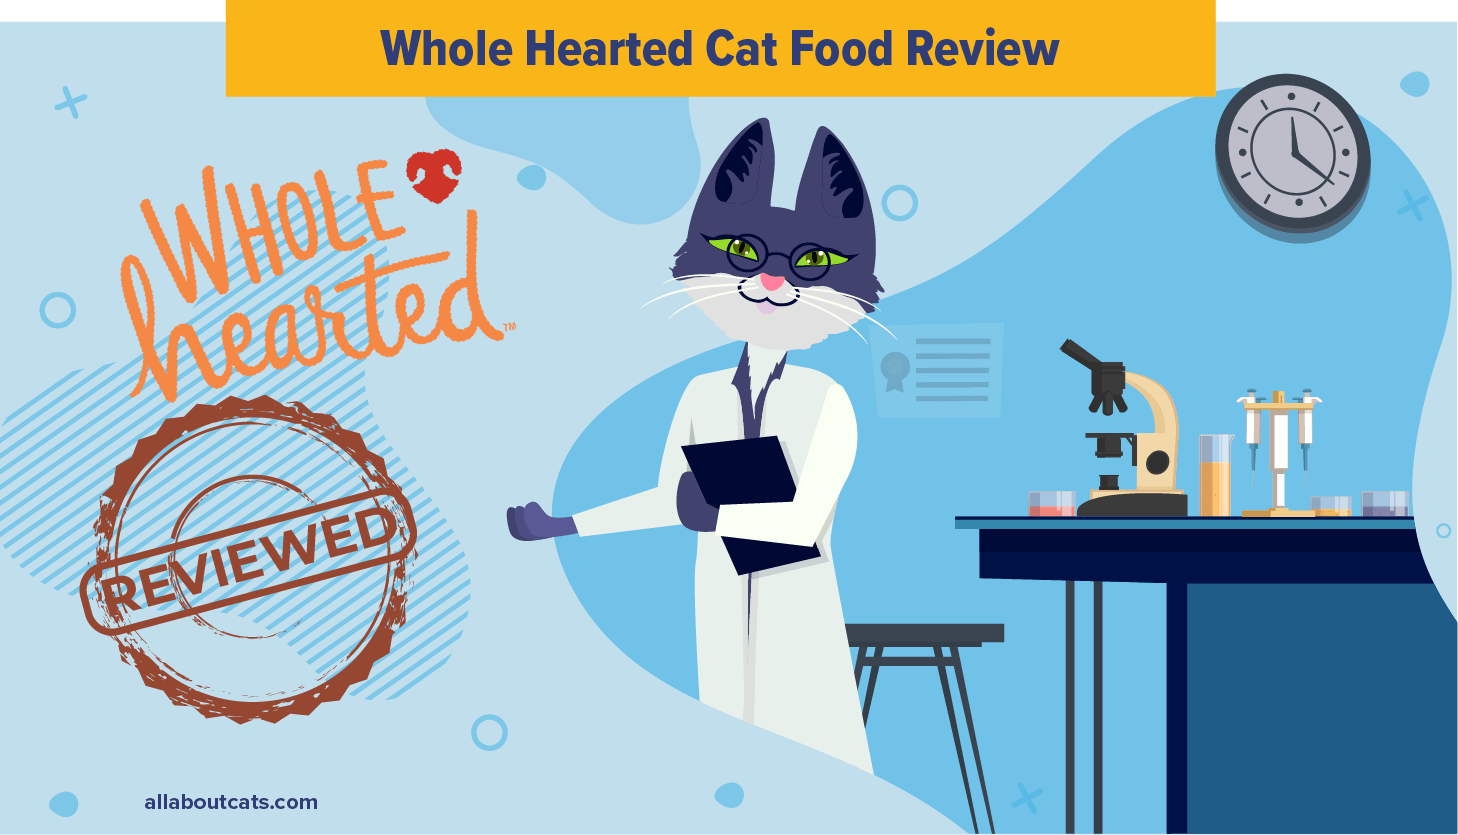 WholeHearted Kattenvoer Review